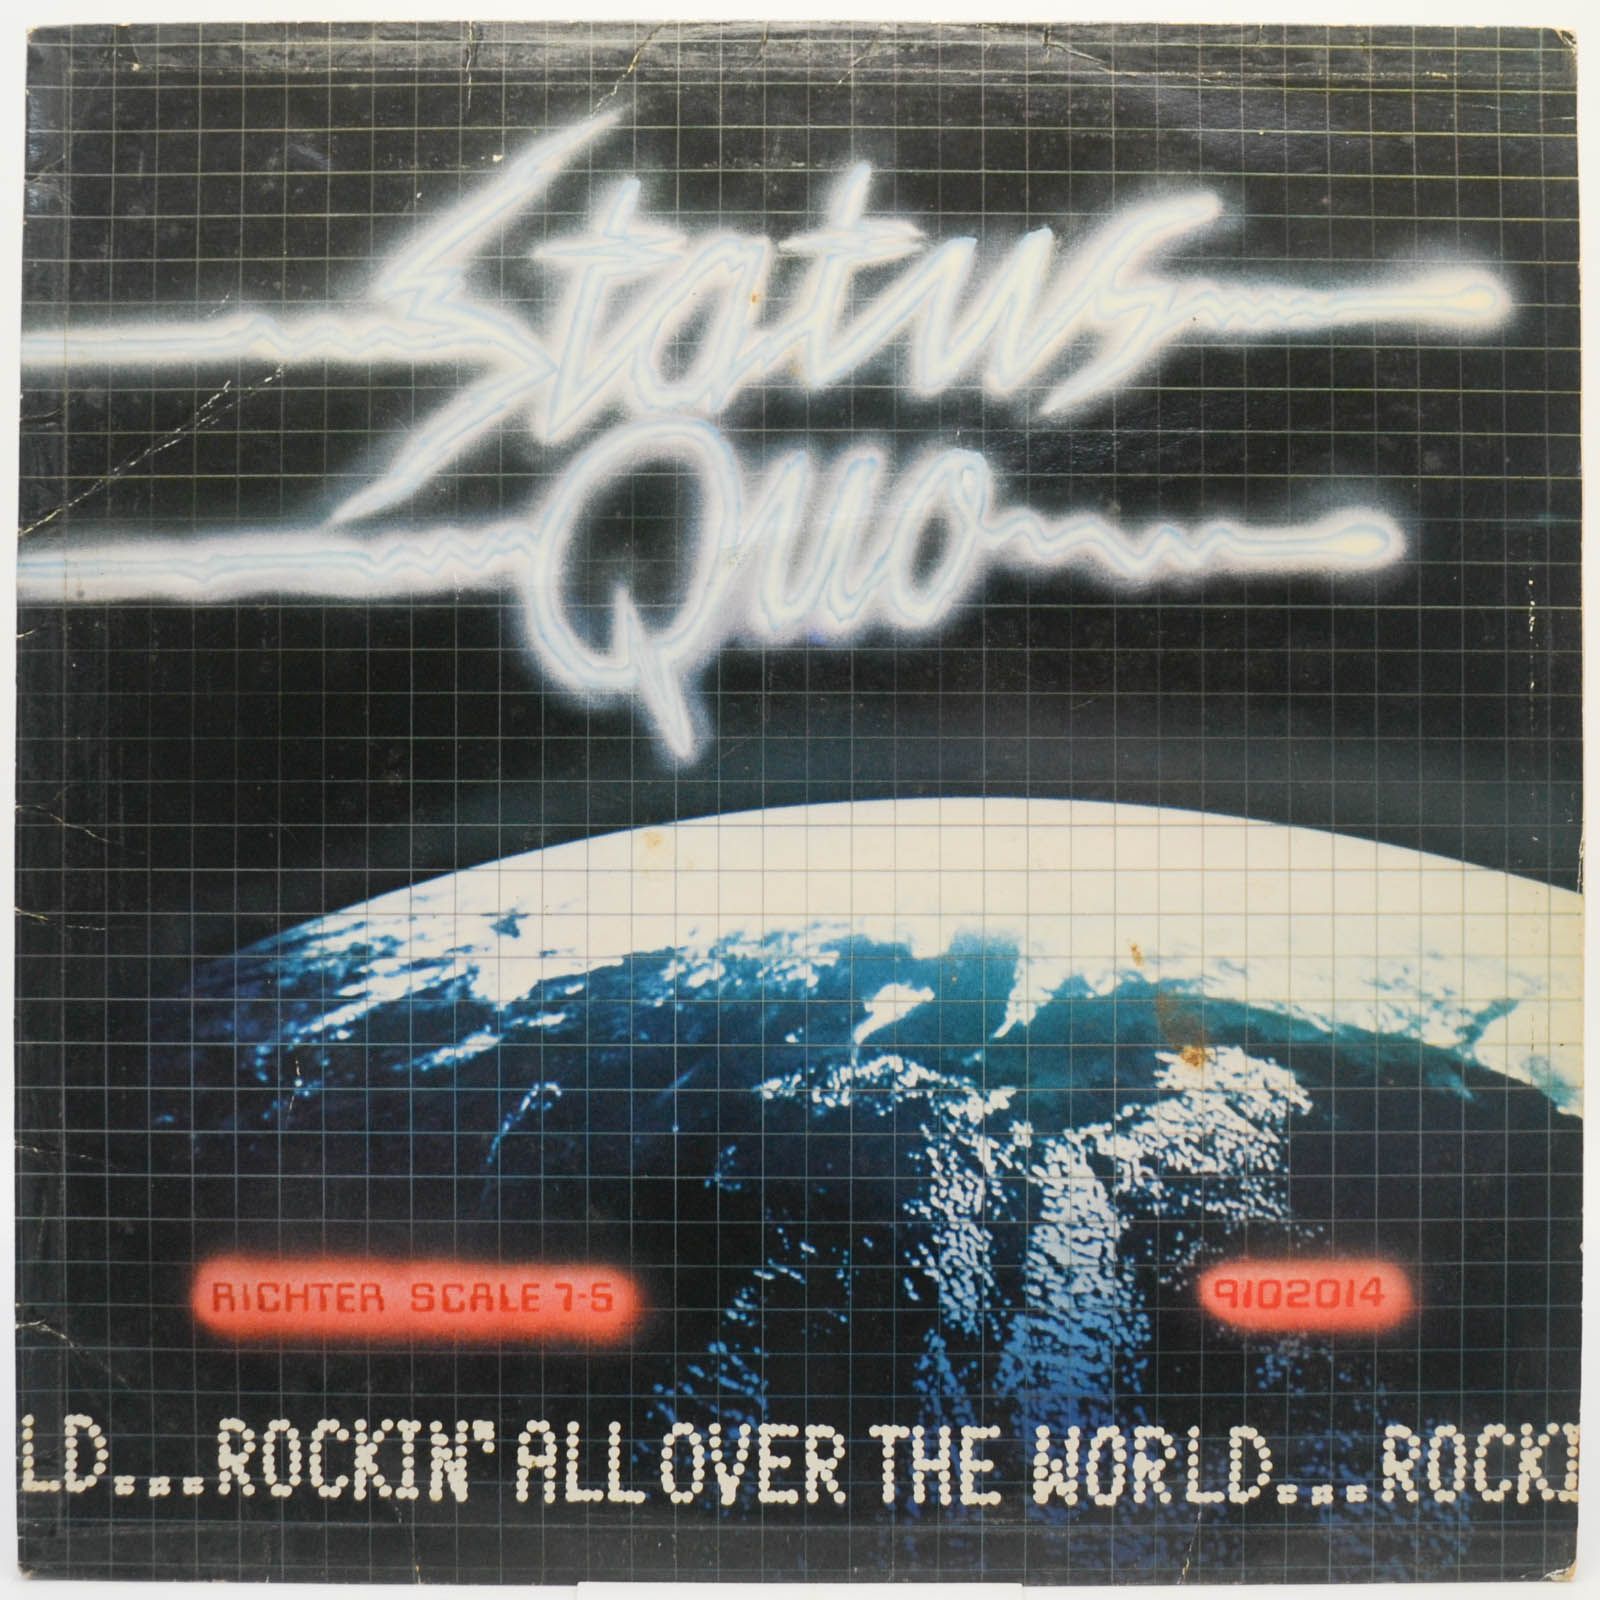 Status Quo — Rockin' All Over The World (1-st, UК), 1977